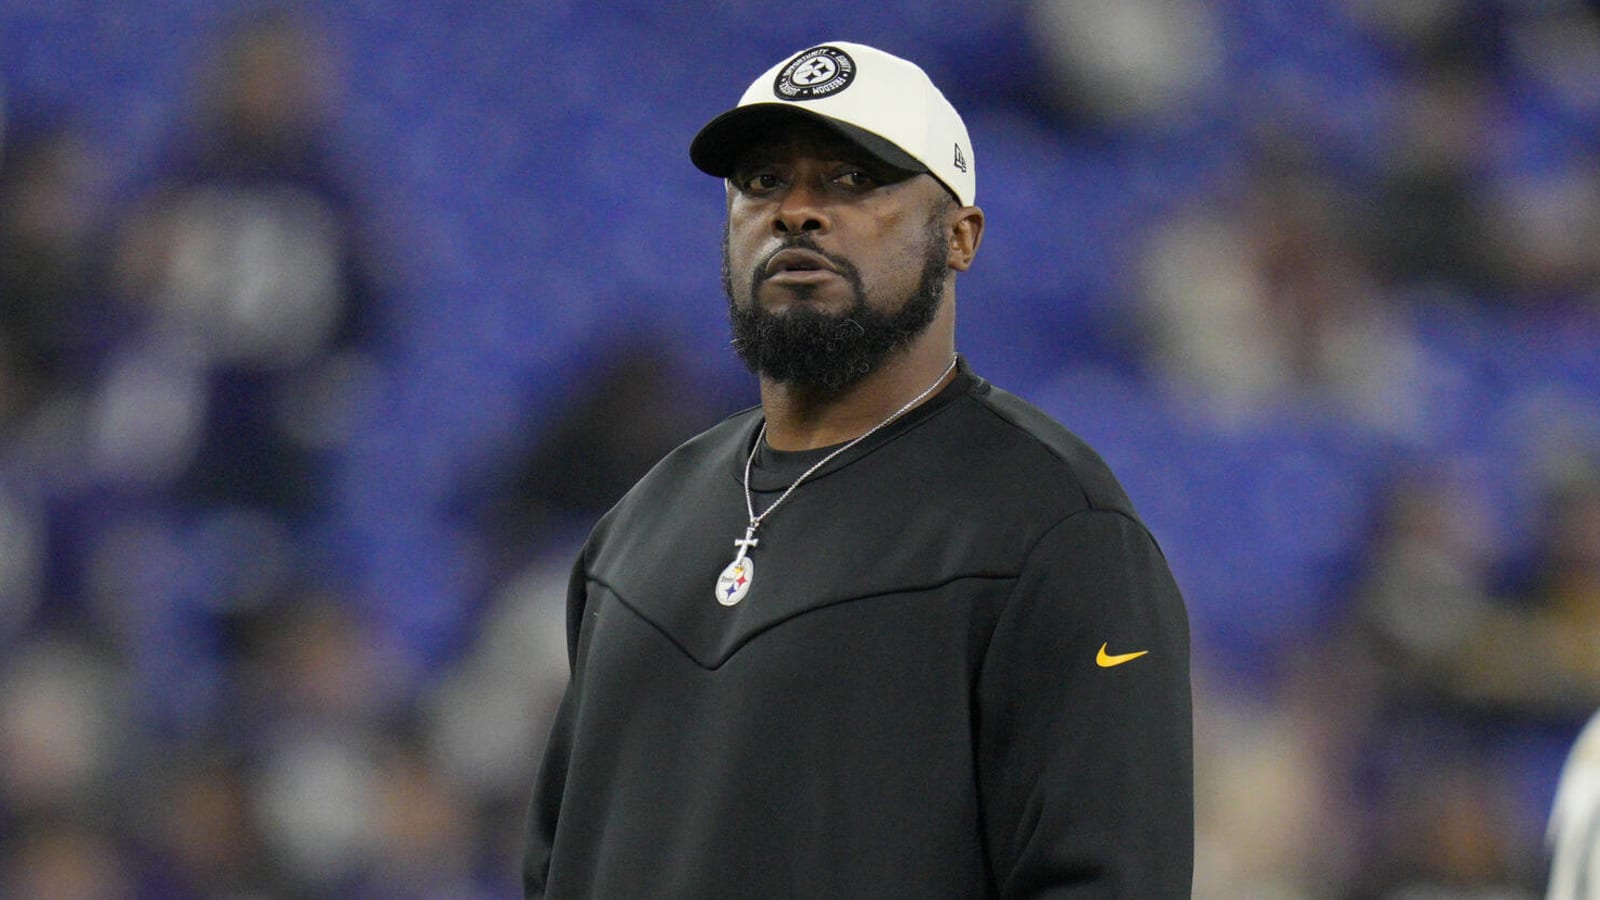 Why Mike Tomlin thinks first-round pick losing job is good